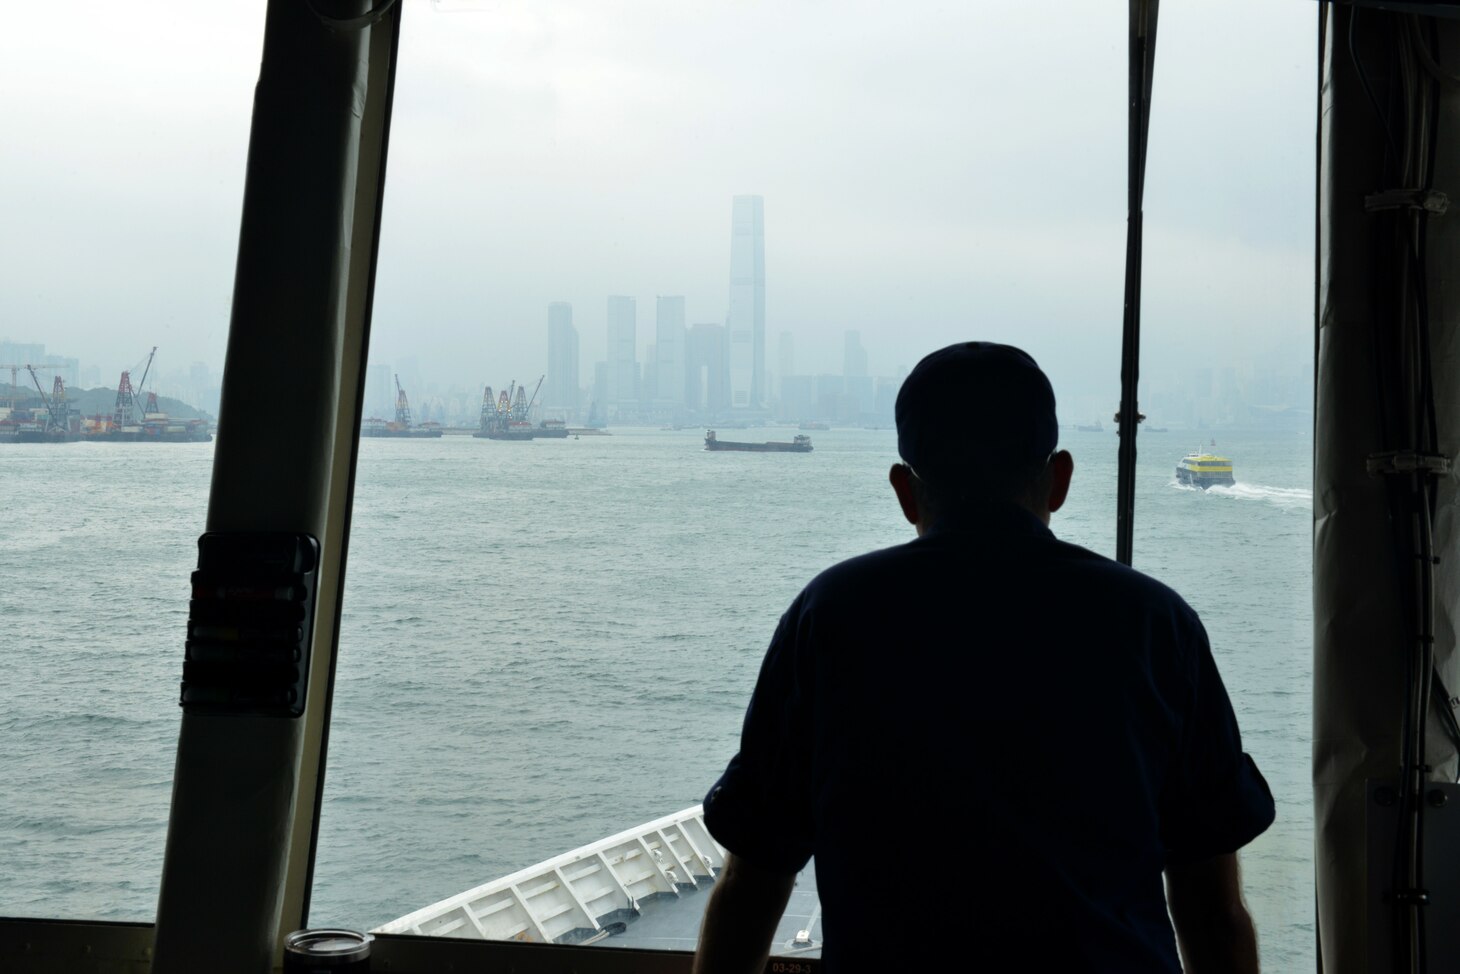 U.S. Coast Guard Cmdr. Robert Hill, executive officer of the U.S. Coast Guard Cutter Bertholf (WMSL 750), looks through the bridge windows as the cutter navigates toward Hong Kong, April 15, 2019. Under the tactical control of Commander, 7th Fleet, Bertholf will patrol and operate as directed, while striving to improve regional maritime governance and security, through capacity building exercises and professional exchanges with numerous partner nations and their respective coast guards and navies.